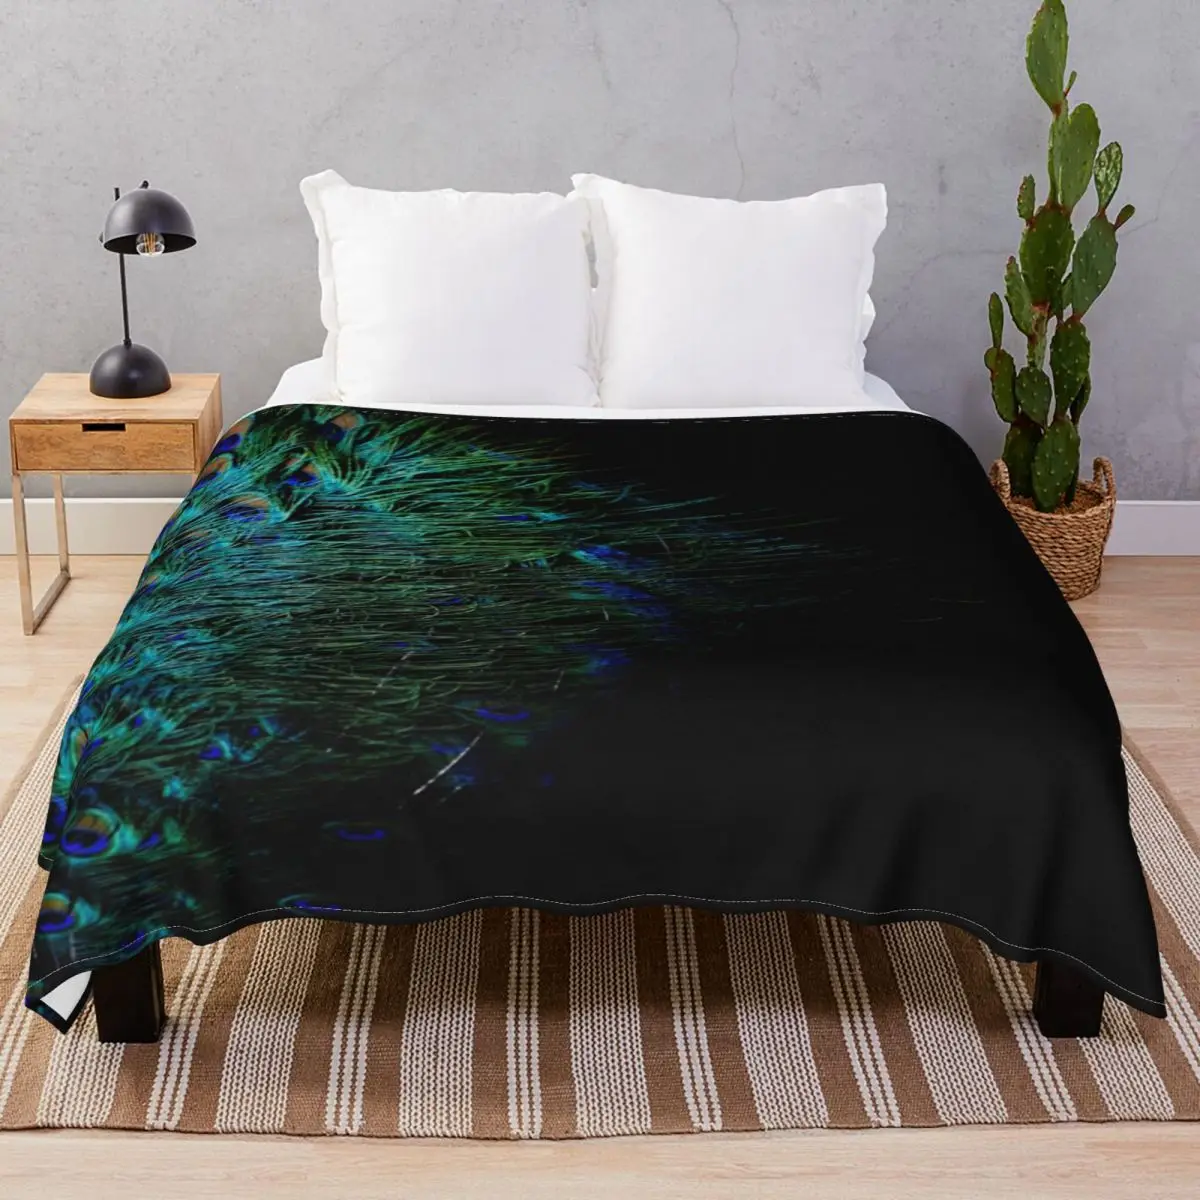 Peacock Feather Blanket Flannel Autumn/Winter Soft Throw Blankets for Bed Sofa Travel Office